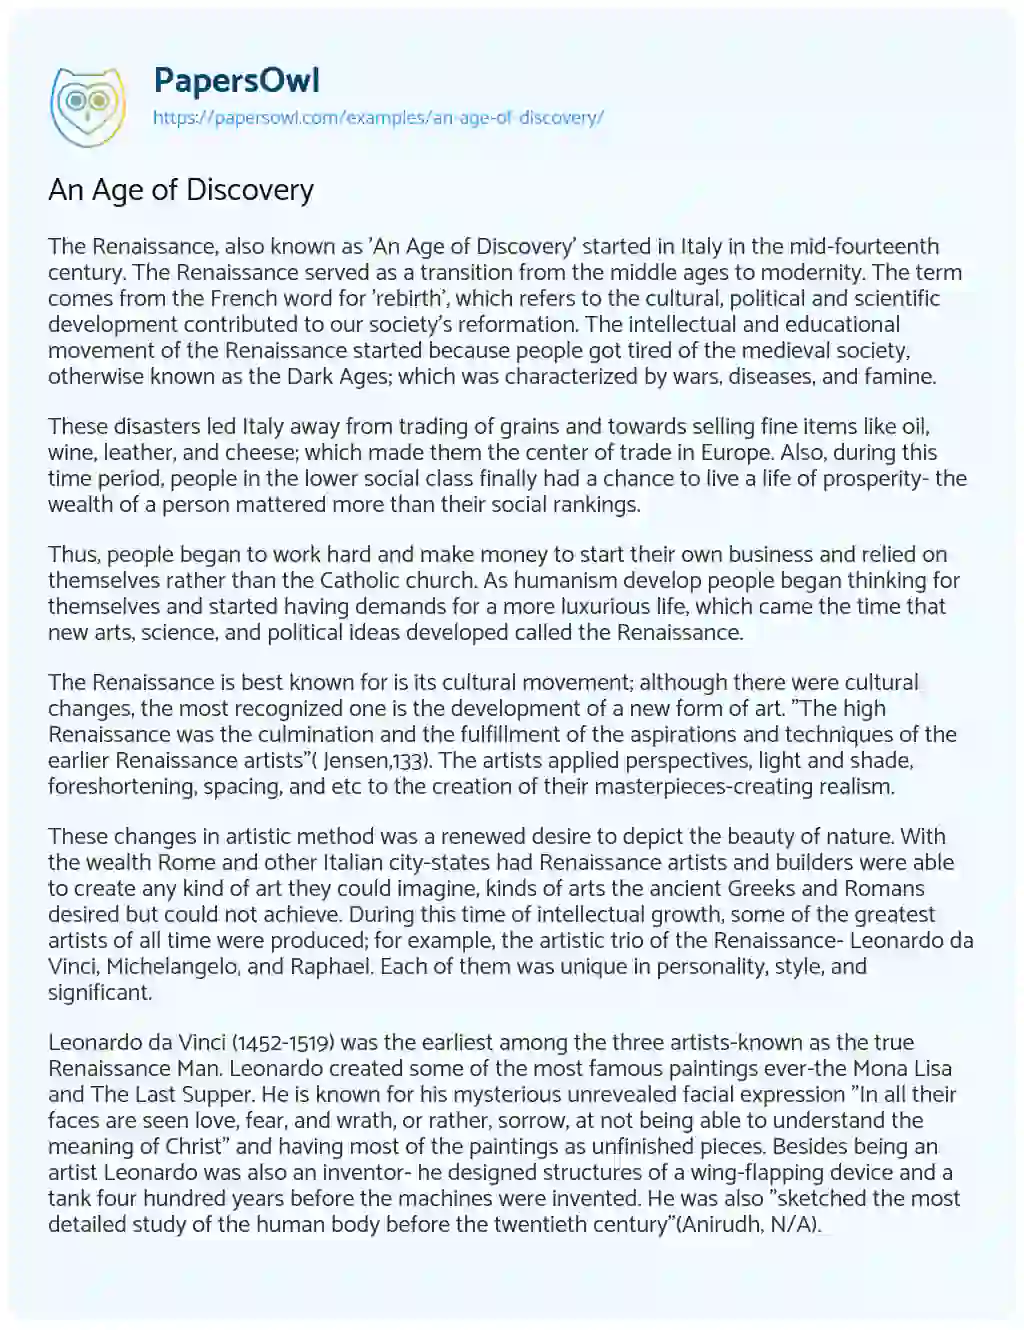 An Age of Discovery essay